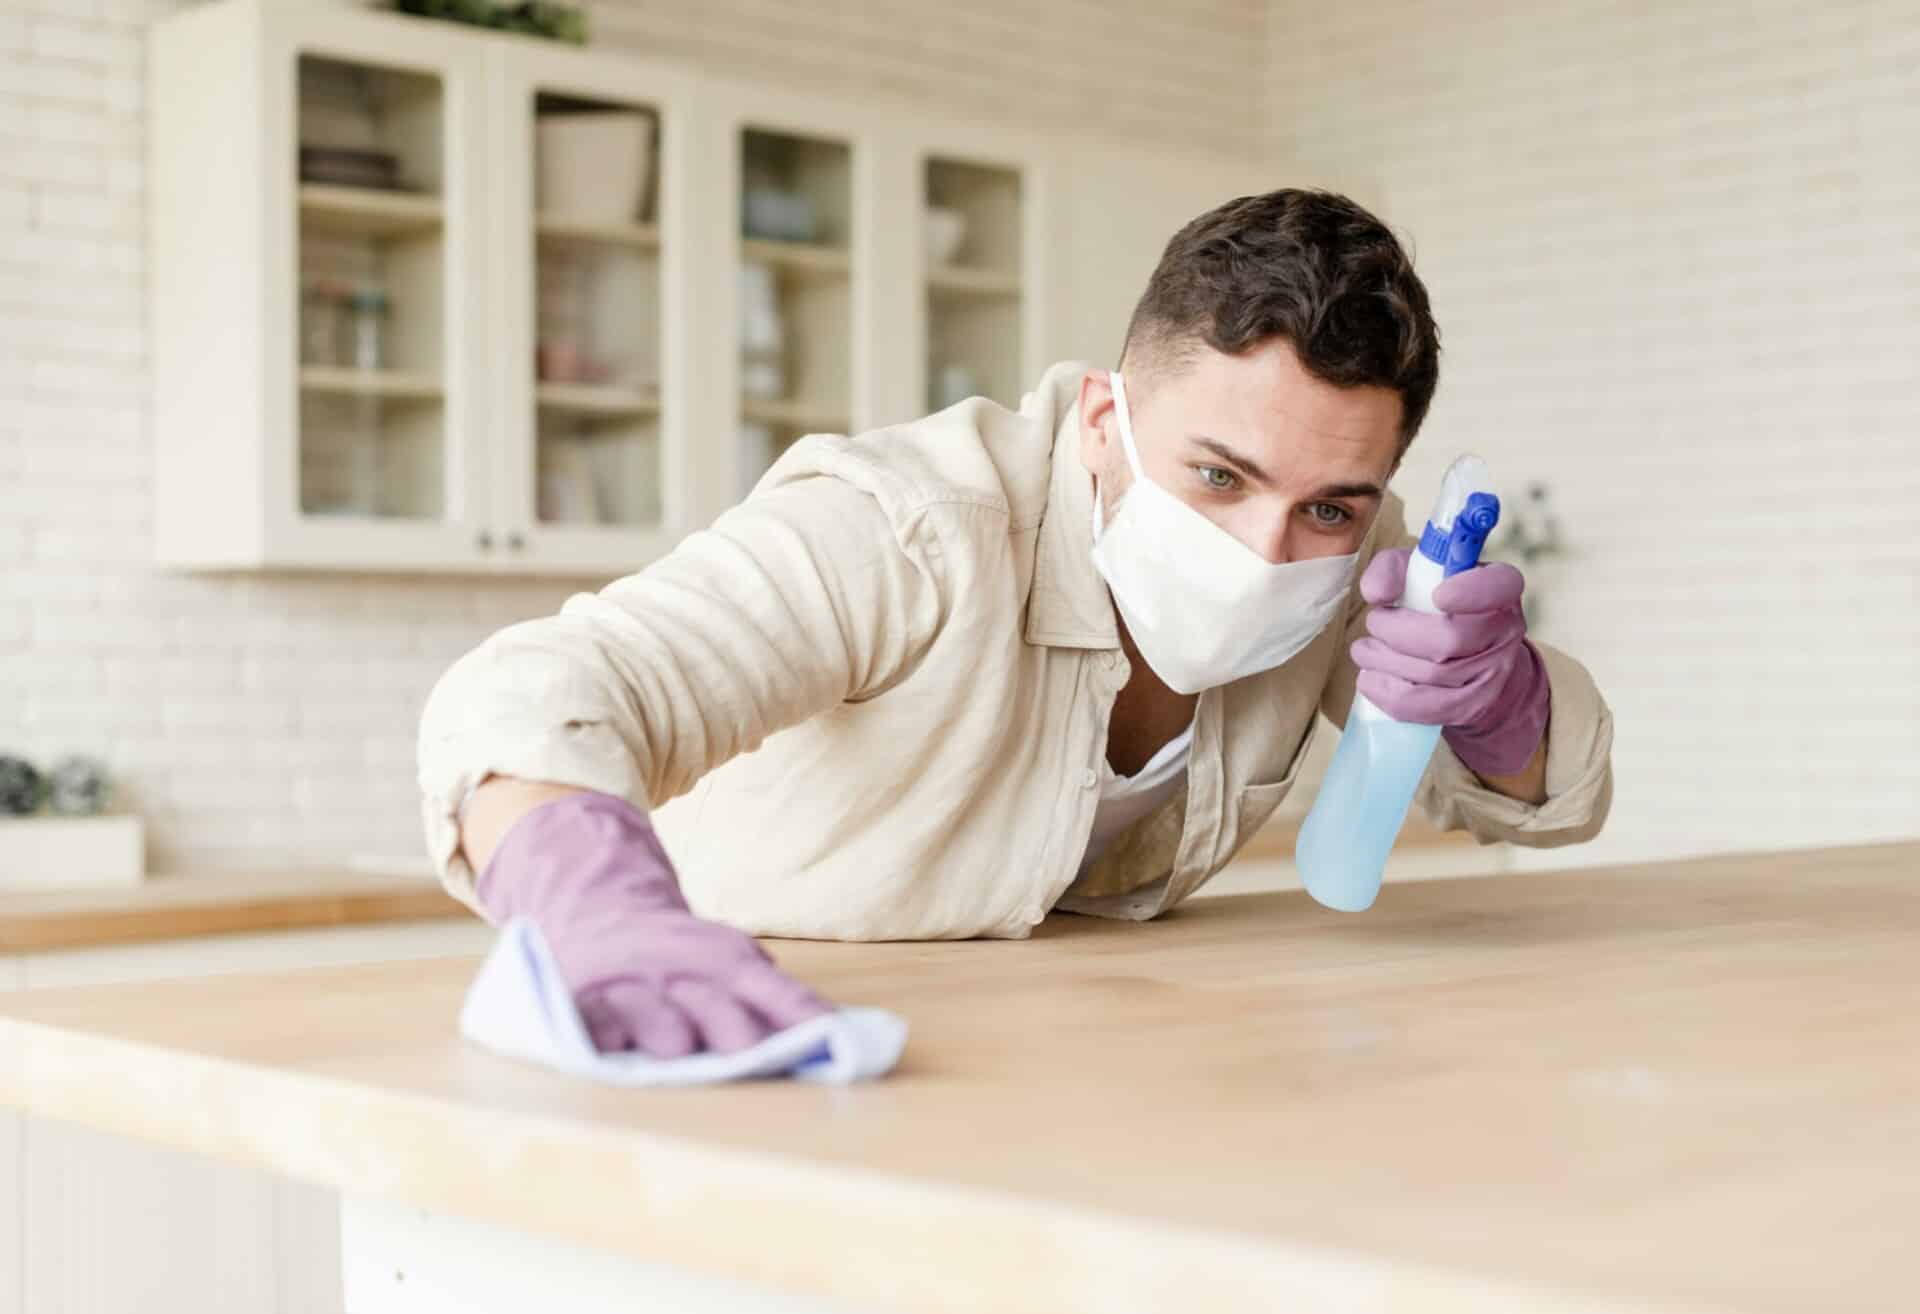 Man in a face mask and gloves cleaning a kitchen counter with a spray bottle and cloth.